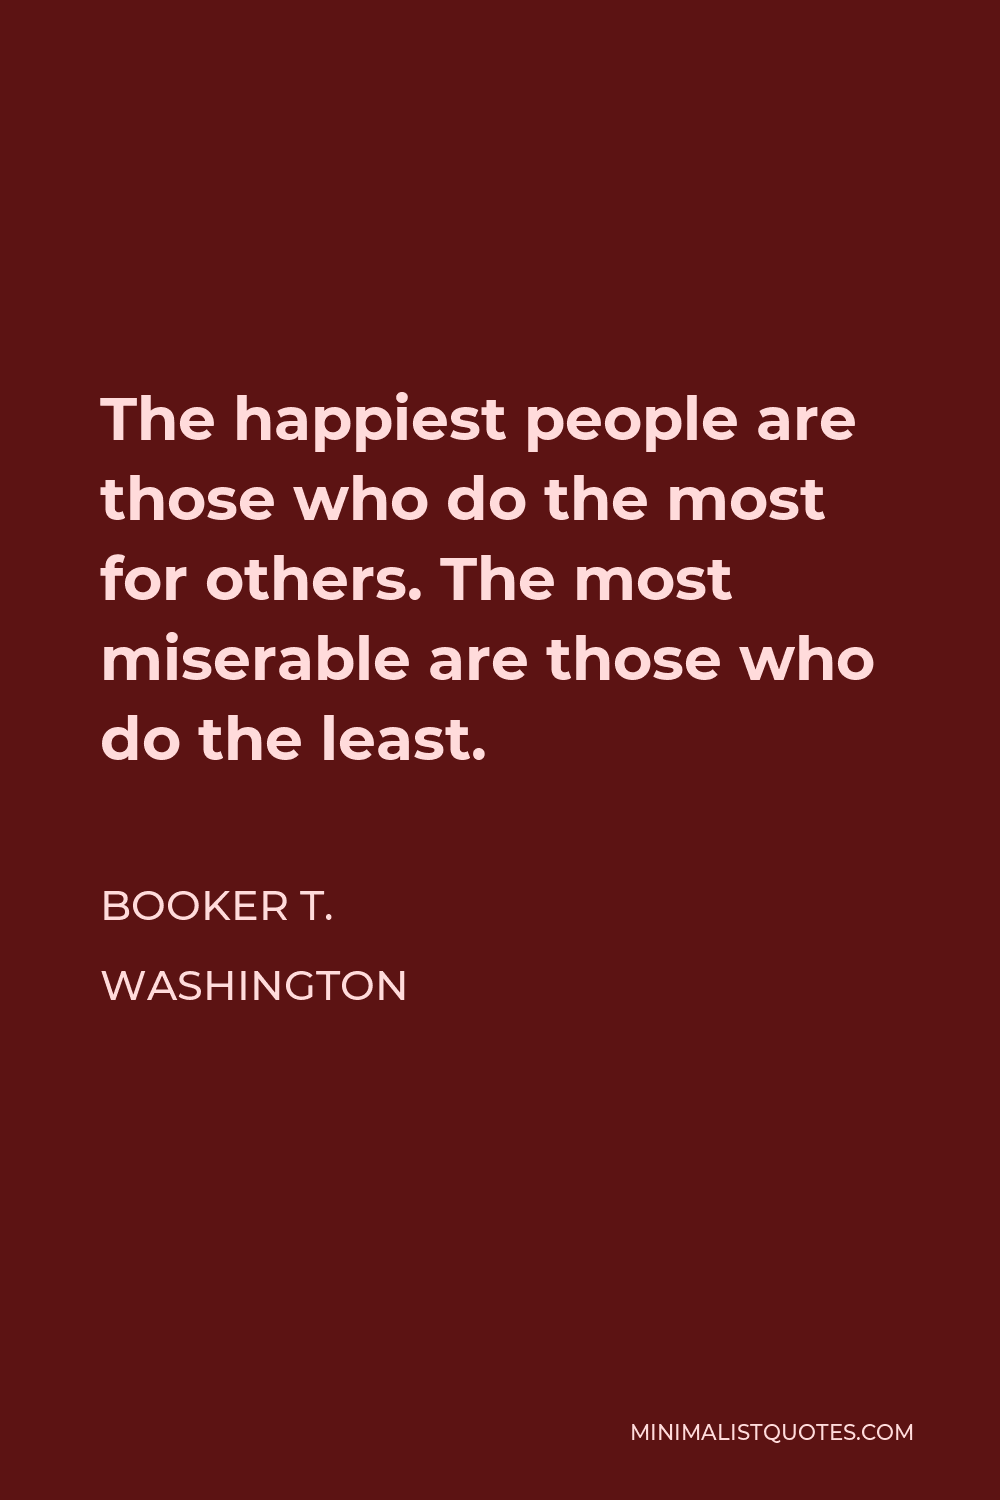 Booker T. Washington Quote - The happiest people are those who do the most for others. The most miserable are those who do the least.